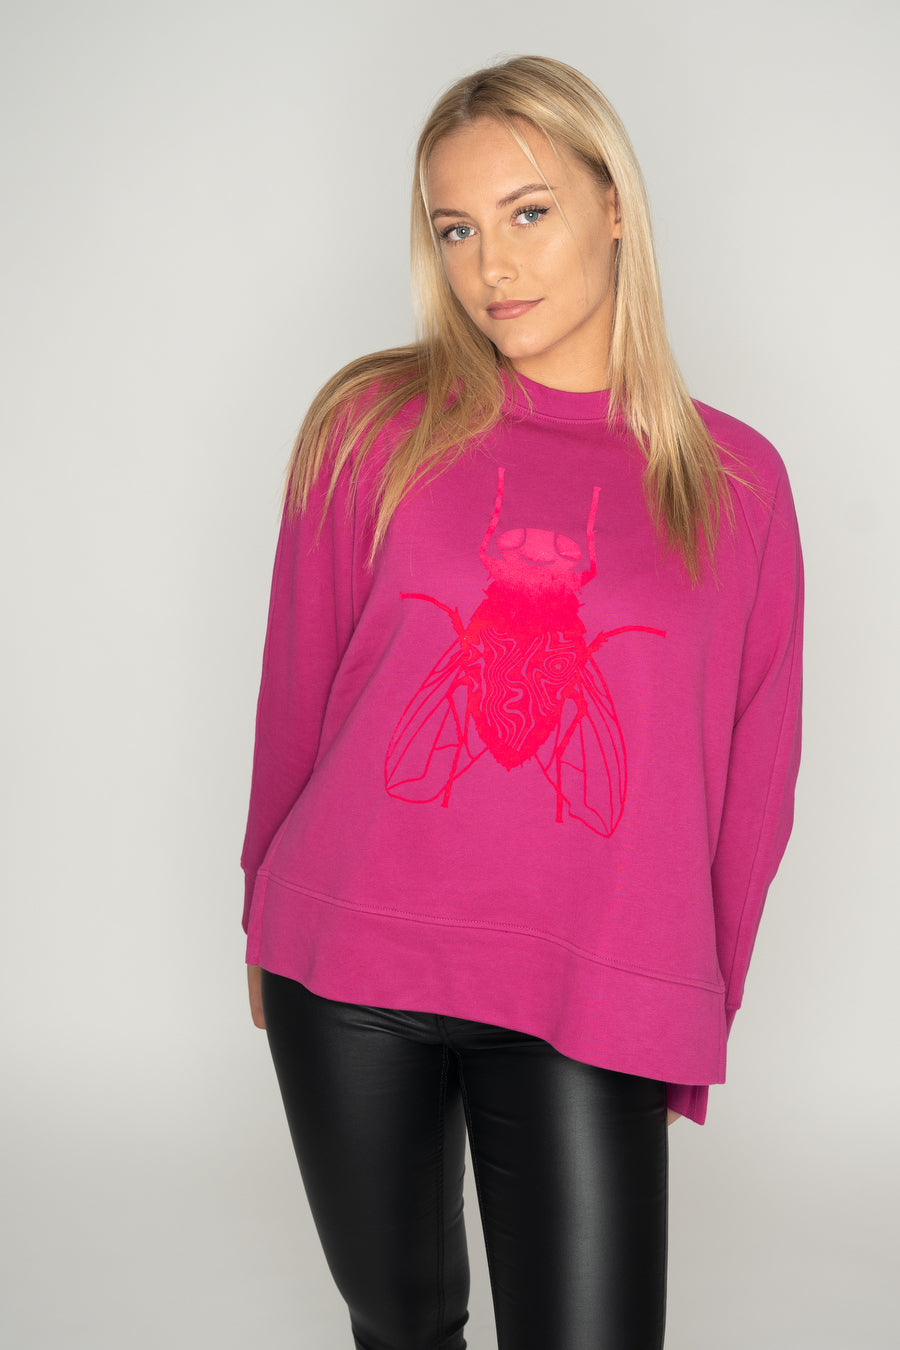 Women's oversize sweater with side cut, 300 g organic cotton - longer on the back